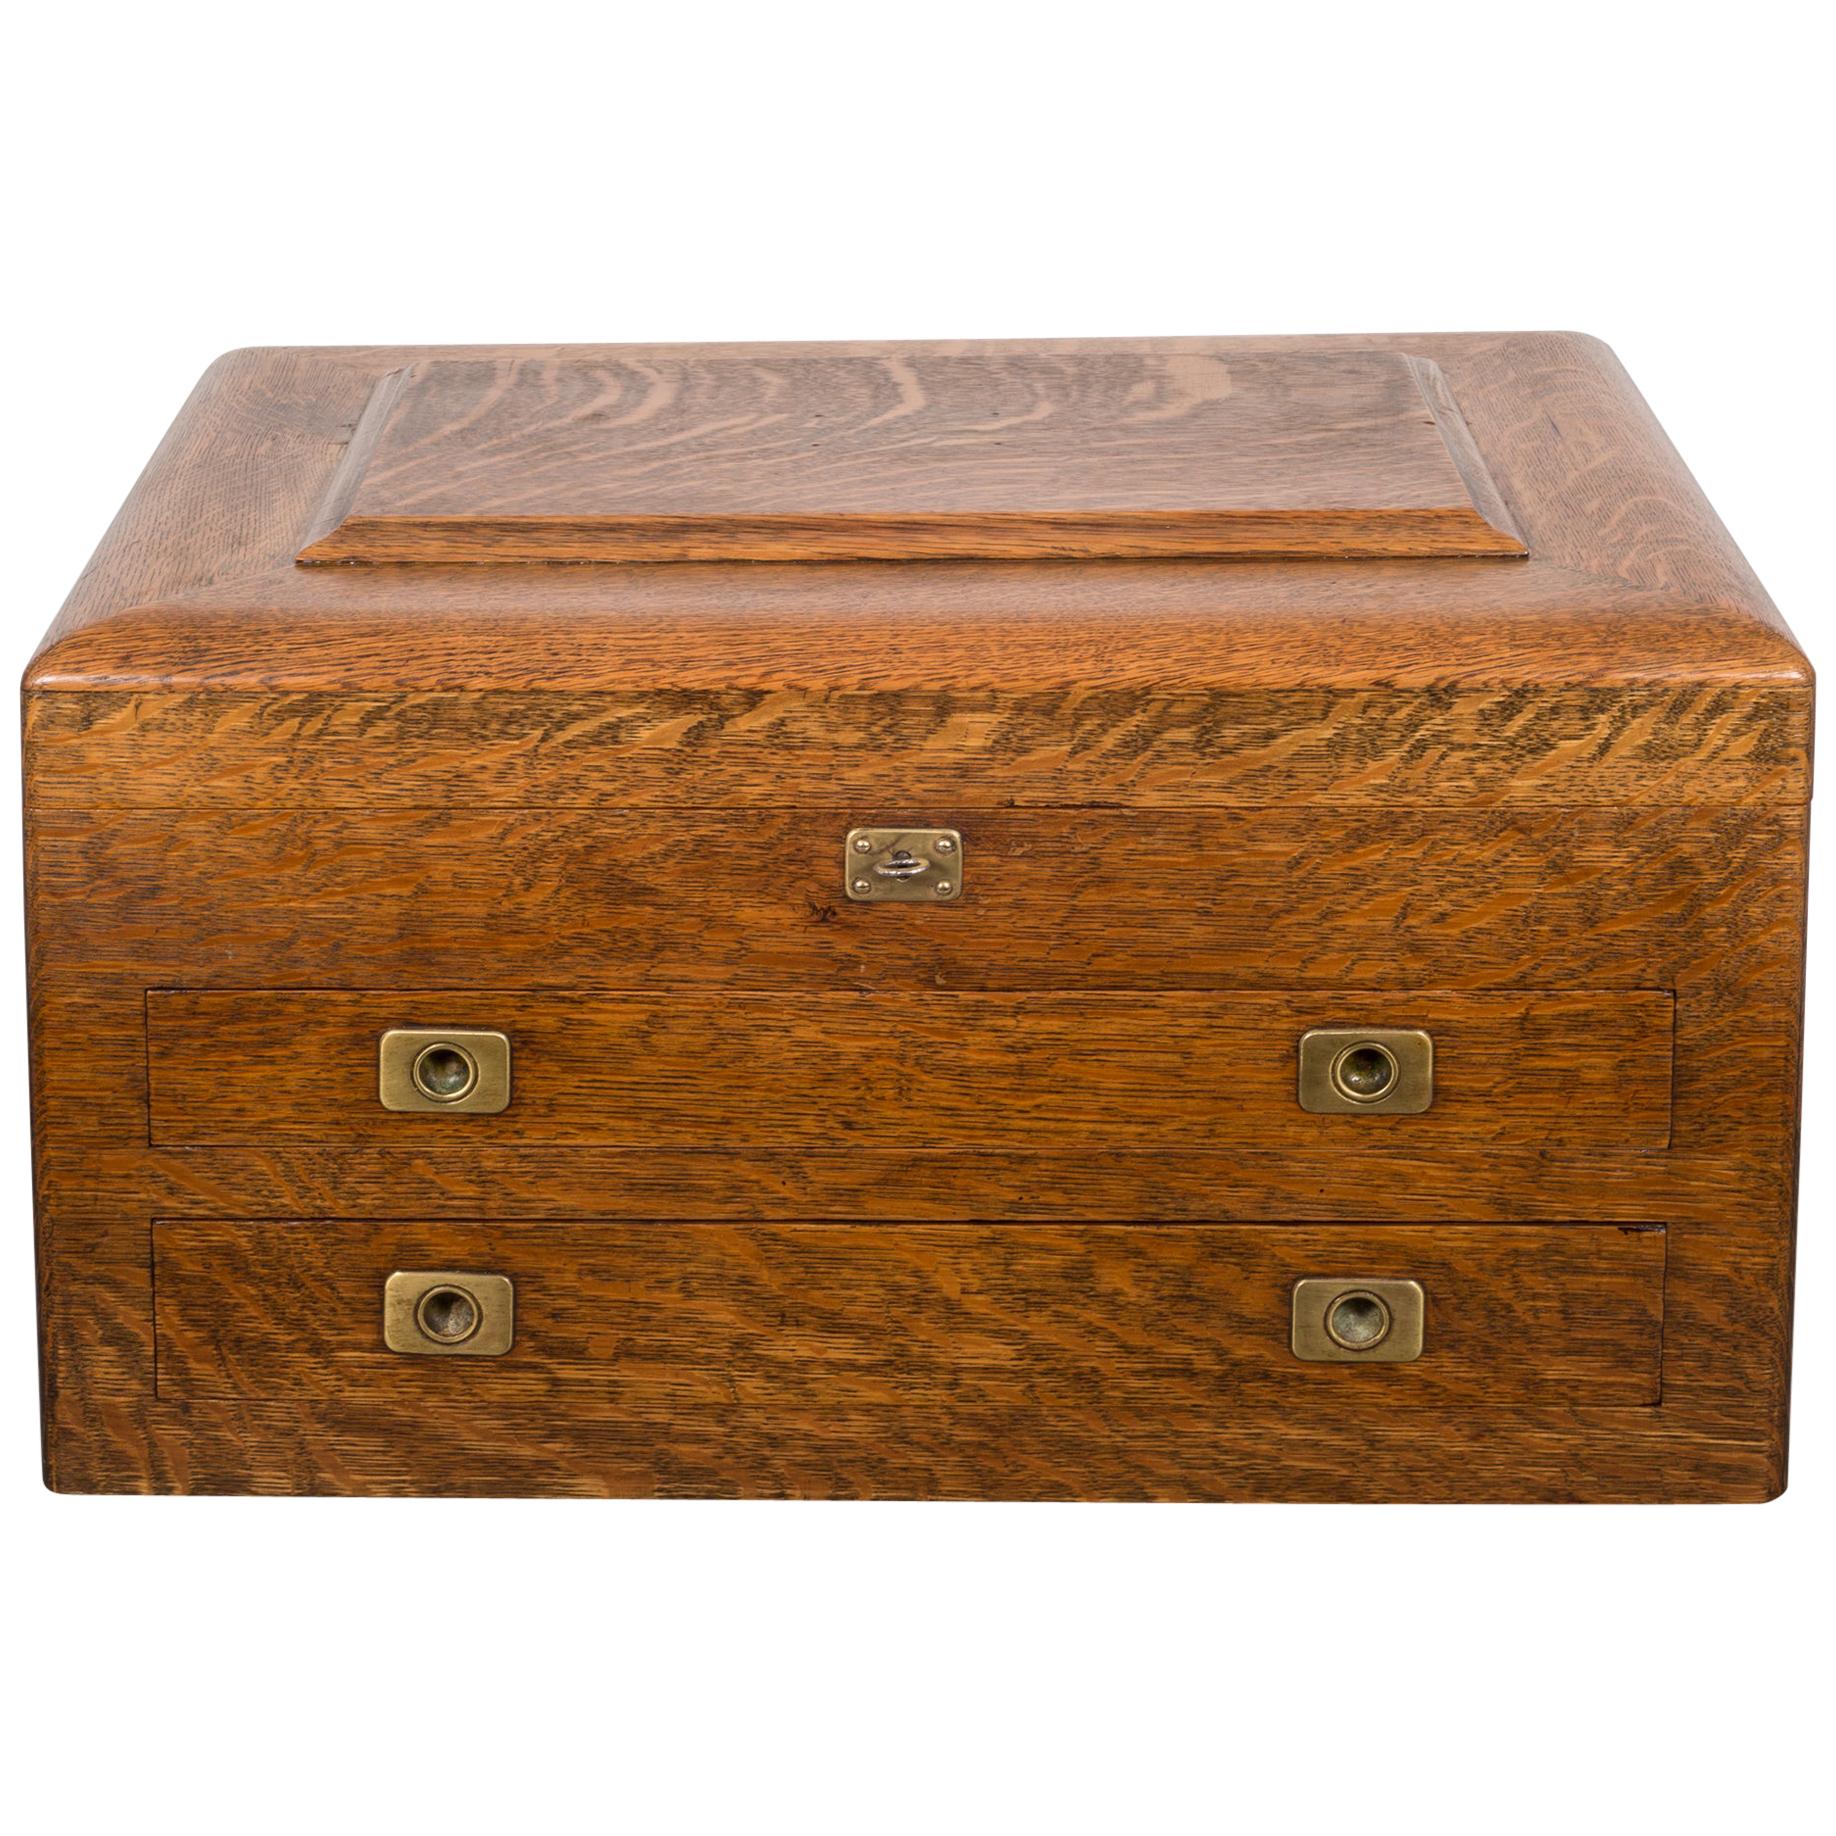 Handcrafted Silverware Chest from DutchCrafters Amish Furniture